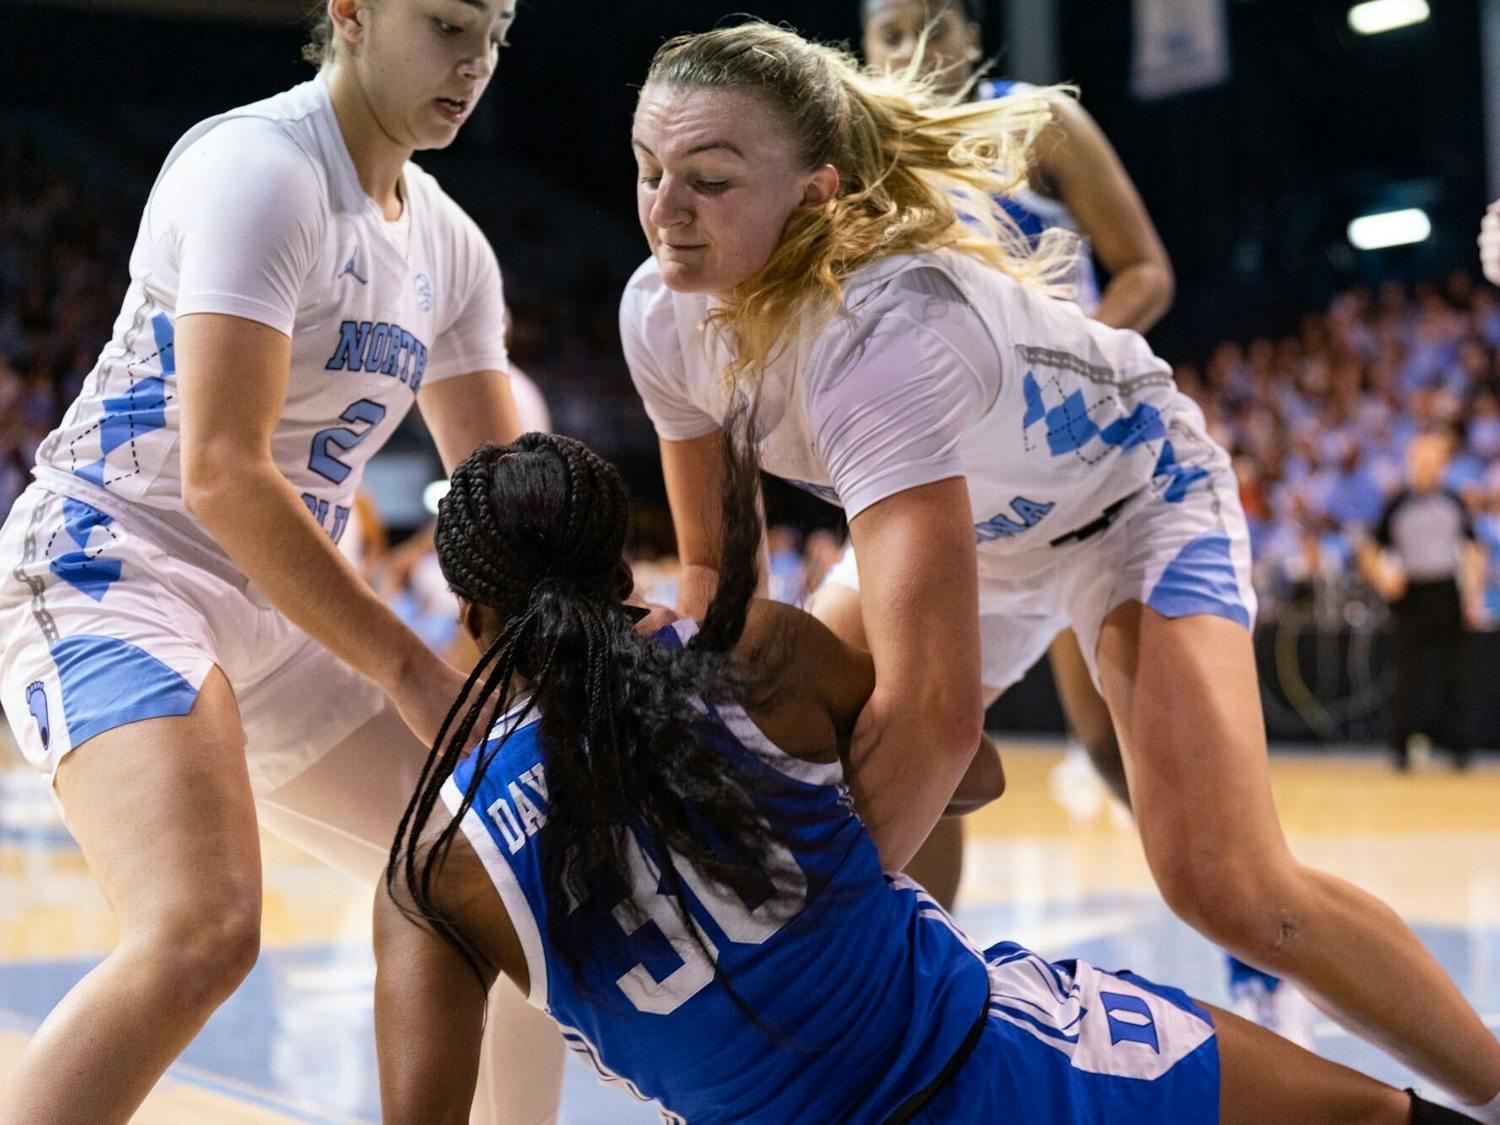 UNC junior guard Alyssa Ustby (1) and UNC freshman guard Paulina Paris (2) fight for the ball during the women’s basketball game against Duke on Thursday, Jan. 19, 2023, at Carmichael Arena.